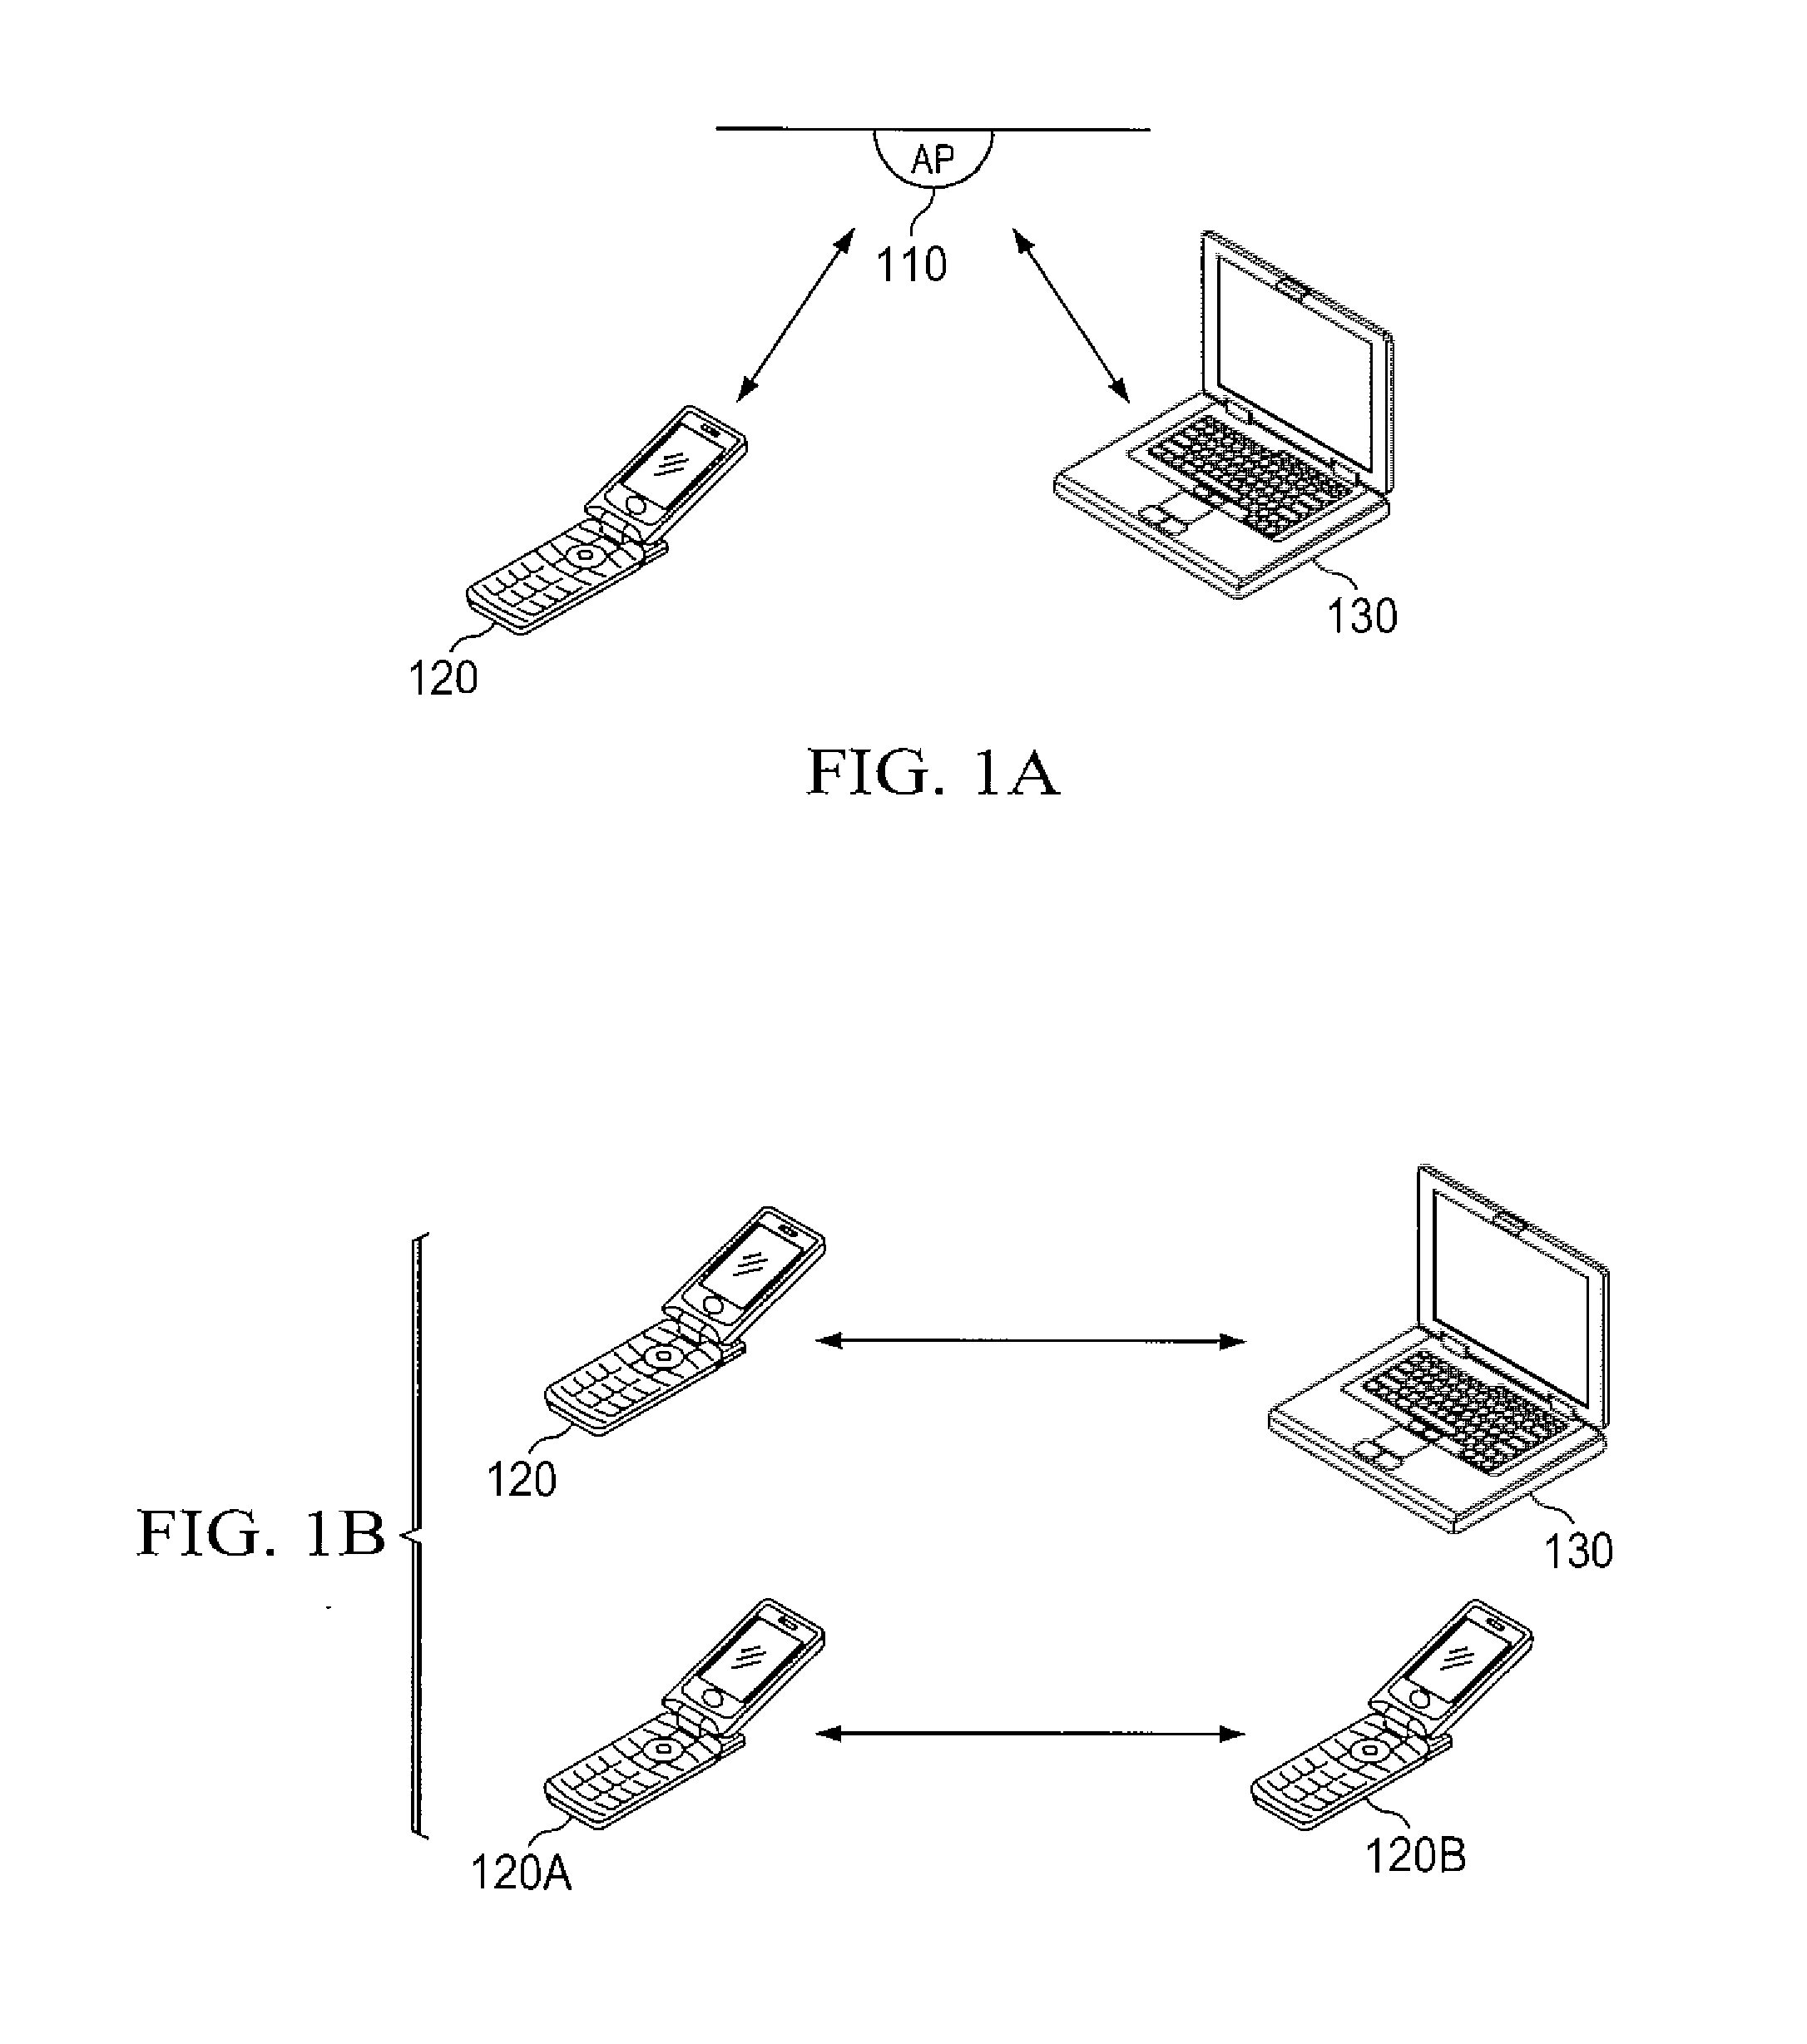 Methods and apparatus for fast and energy-efficient link recovery in a visible light communication (VLC) system